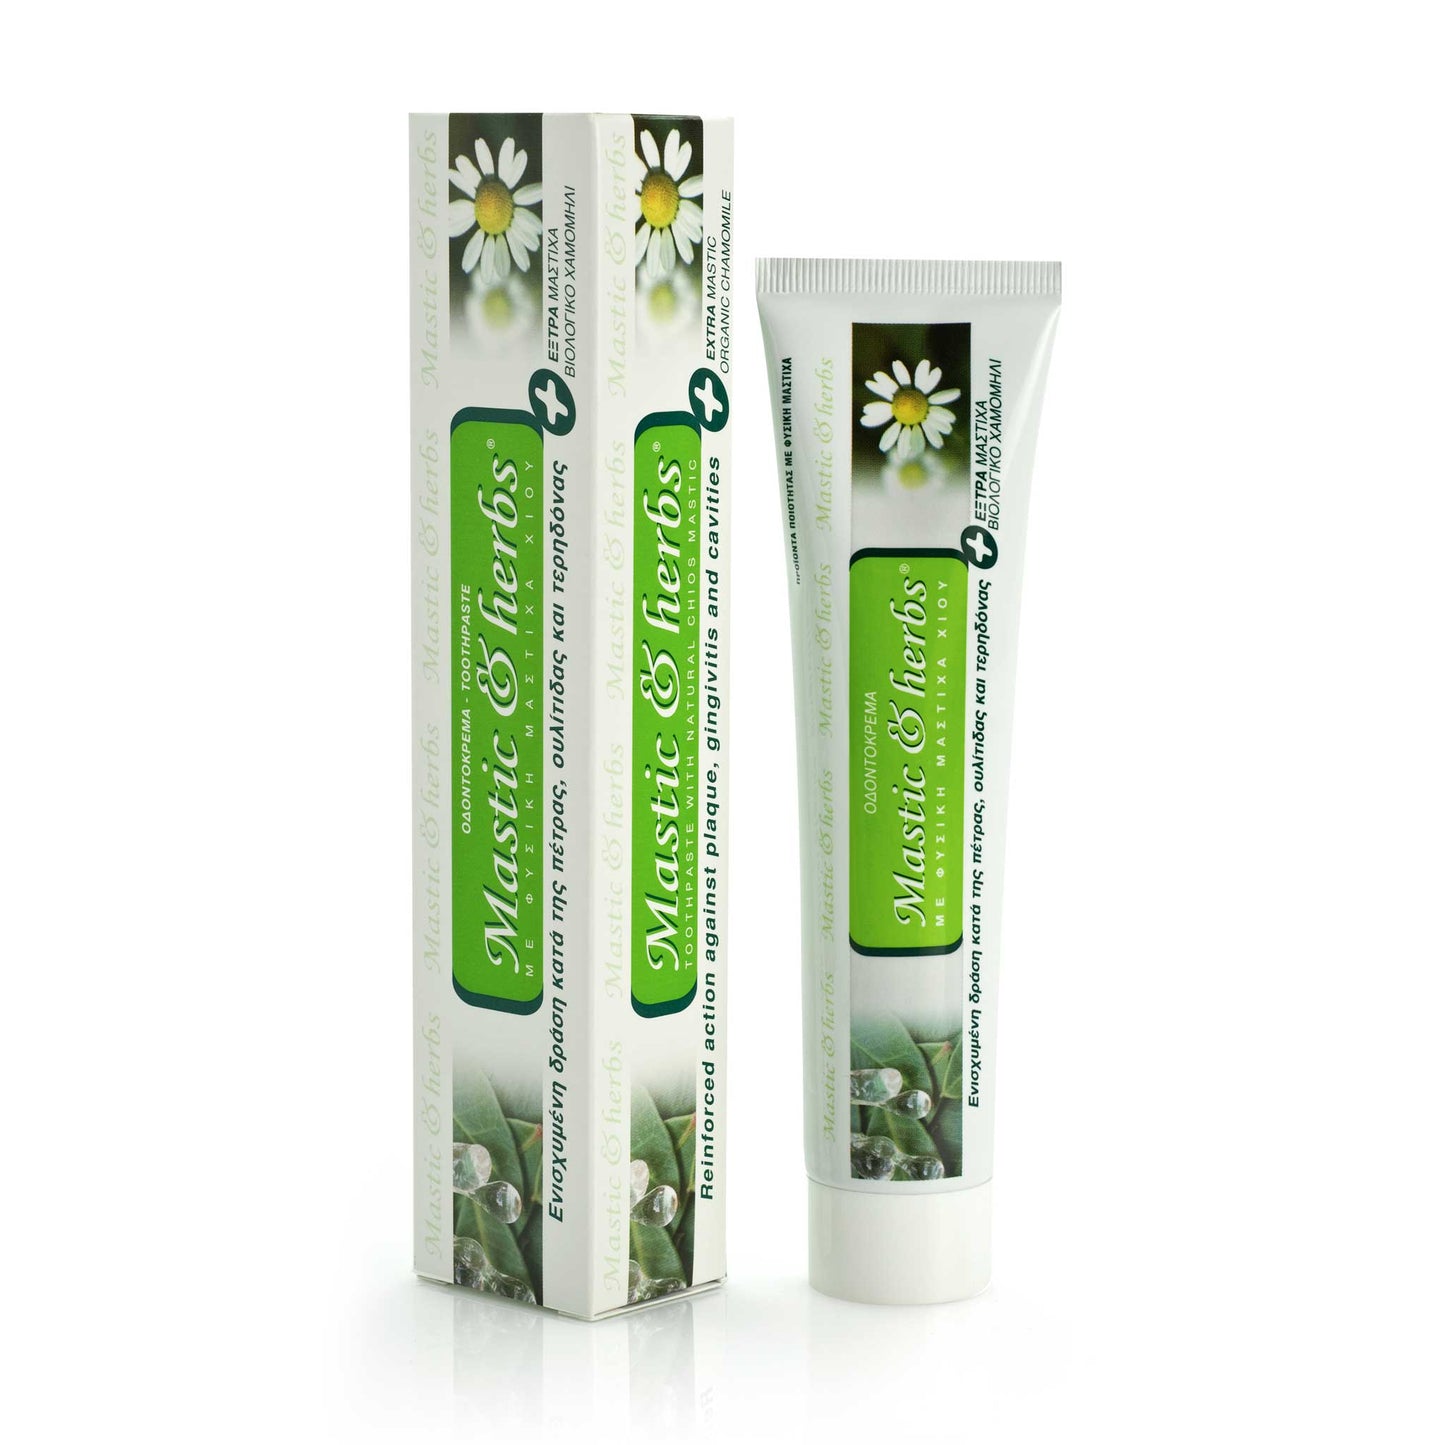 Toothpaste with Chios mastic gum oil and organic chamomile